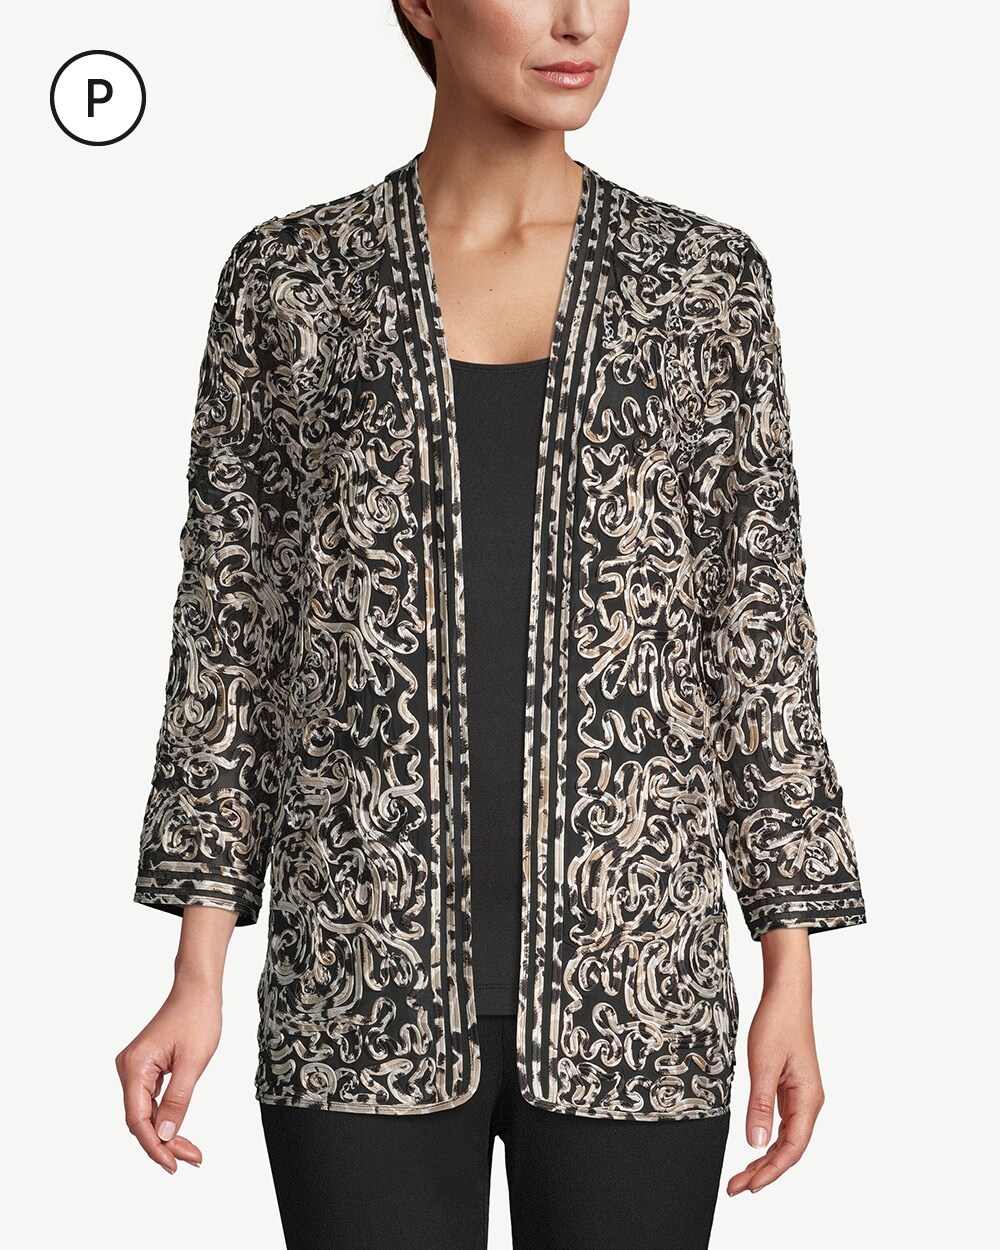 Petite Travelers Collection Printed Soutache Jacket